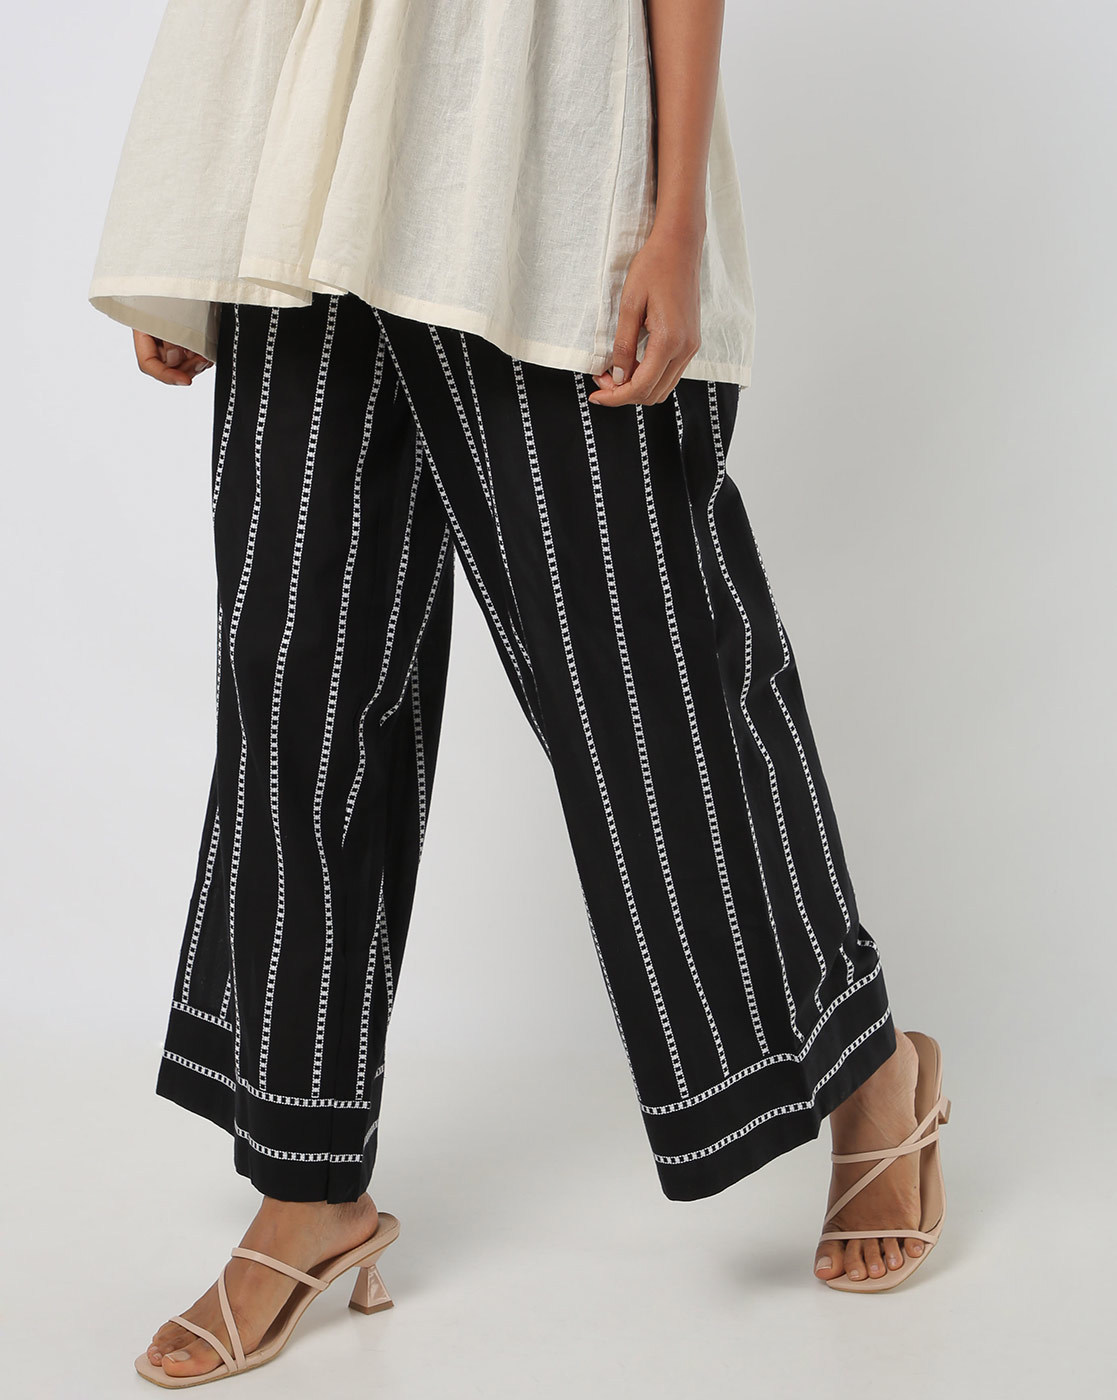 River Island stripe palazzo pants in white - part of a set | ASOS